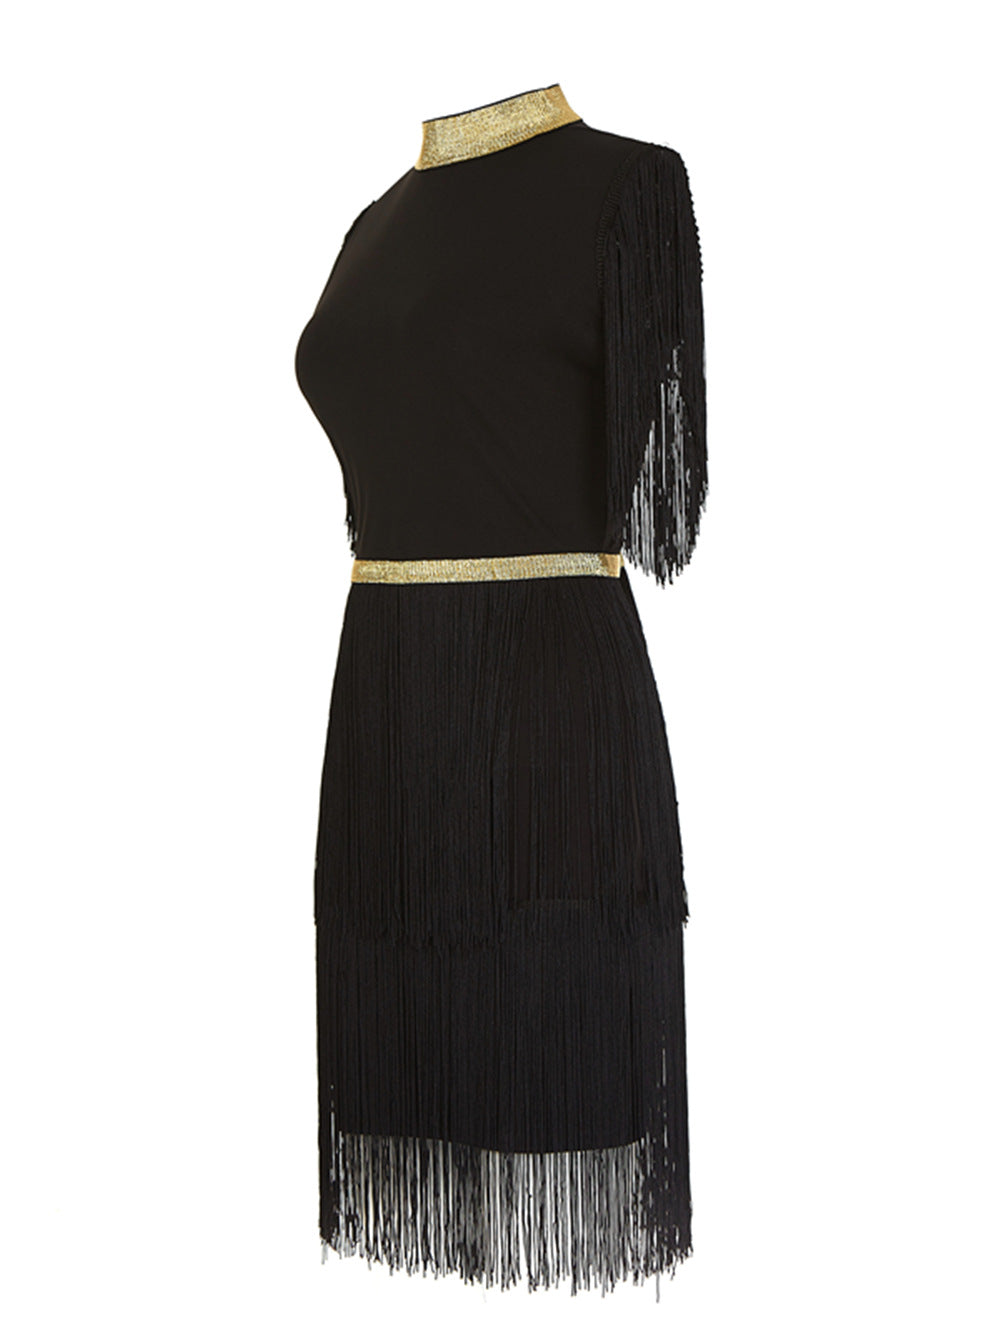 Roxy Black And Gold Bandage Dress With Tassels - steven wick